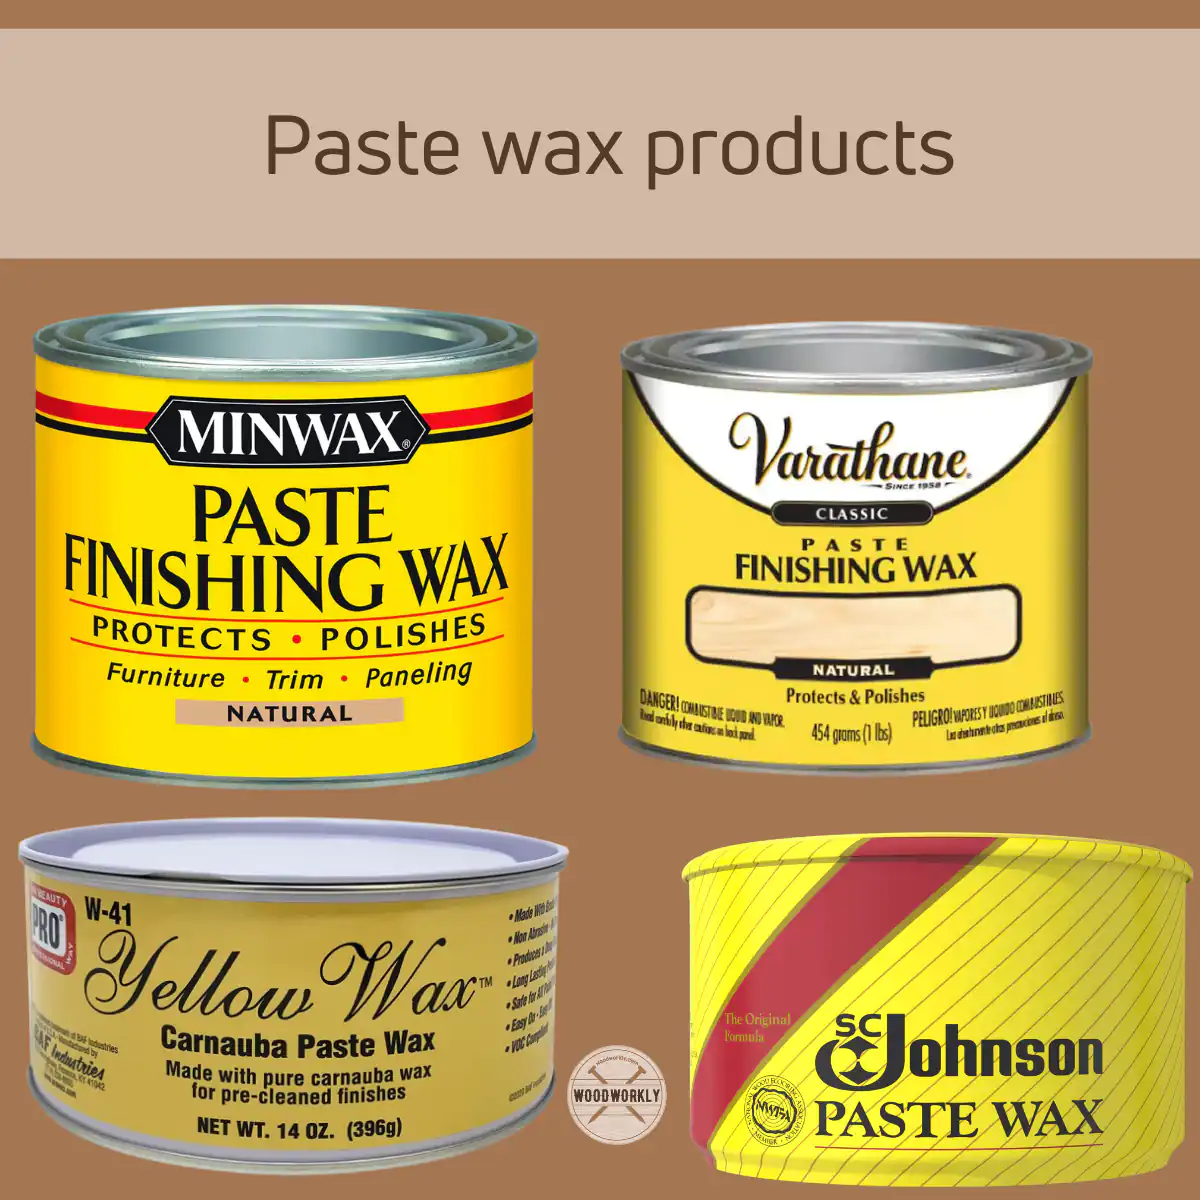 Paste wax products